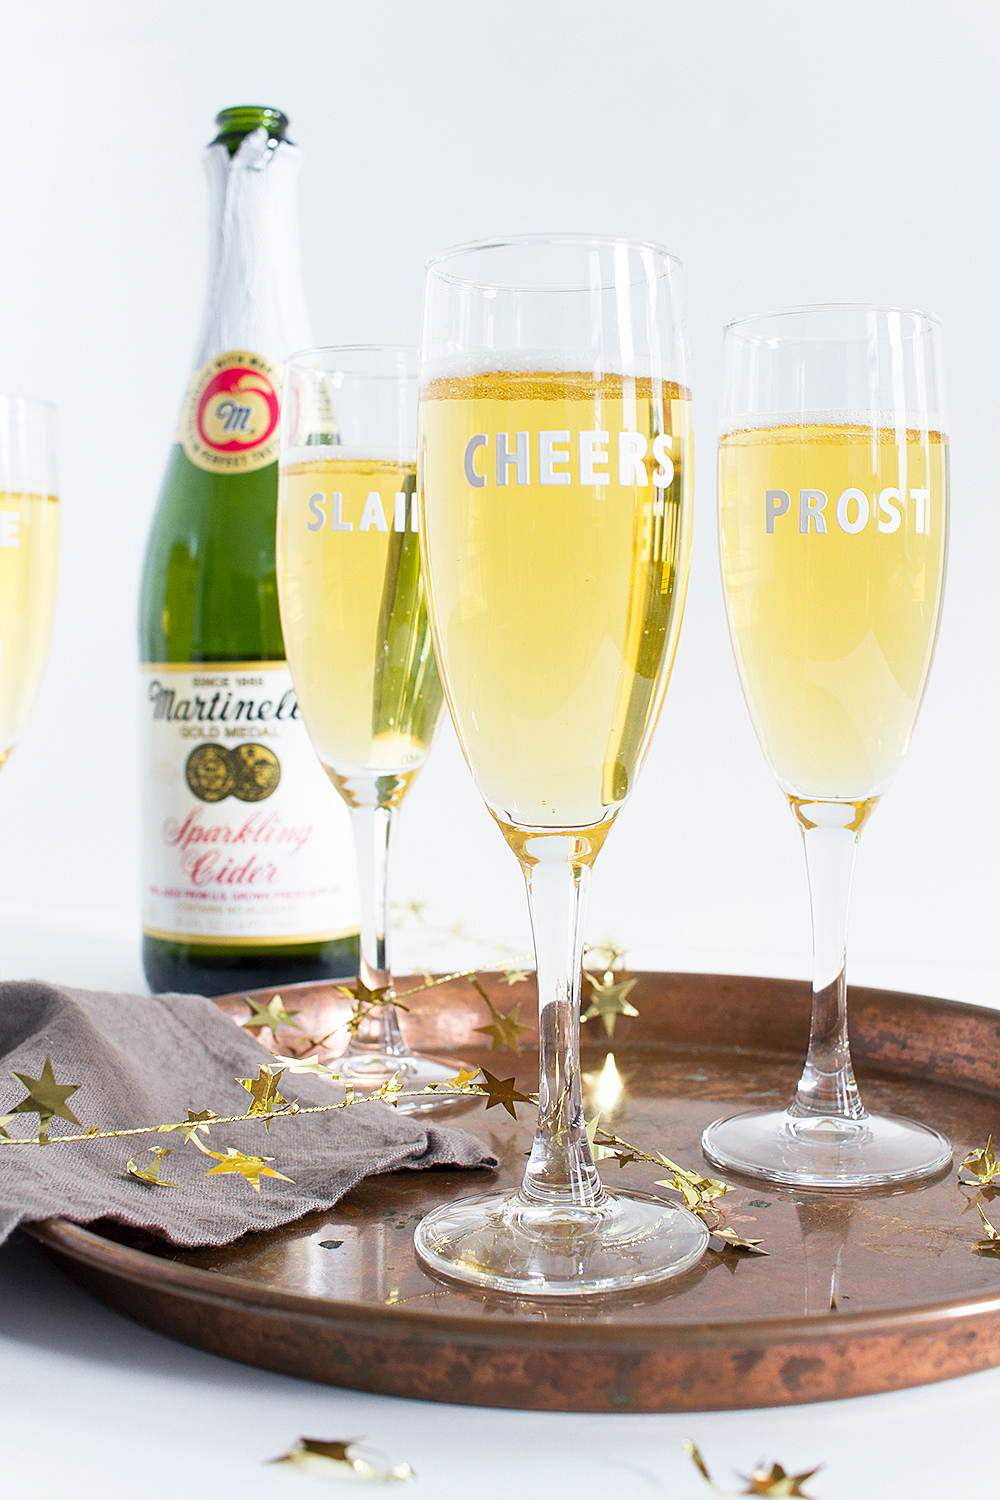 Get festive with this 5 minute New Year's Eve party hack! These DIY Cheers Champagne Flutes are super quick, and all you need are stickers!